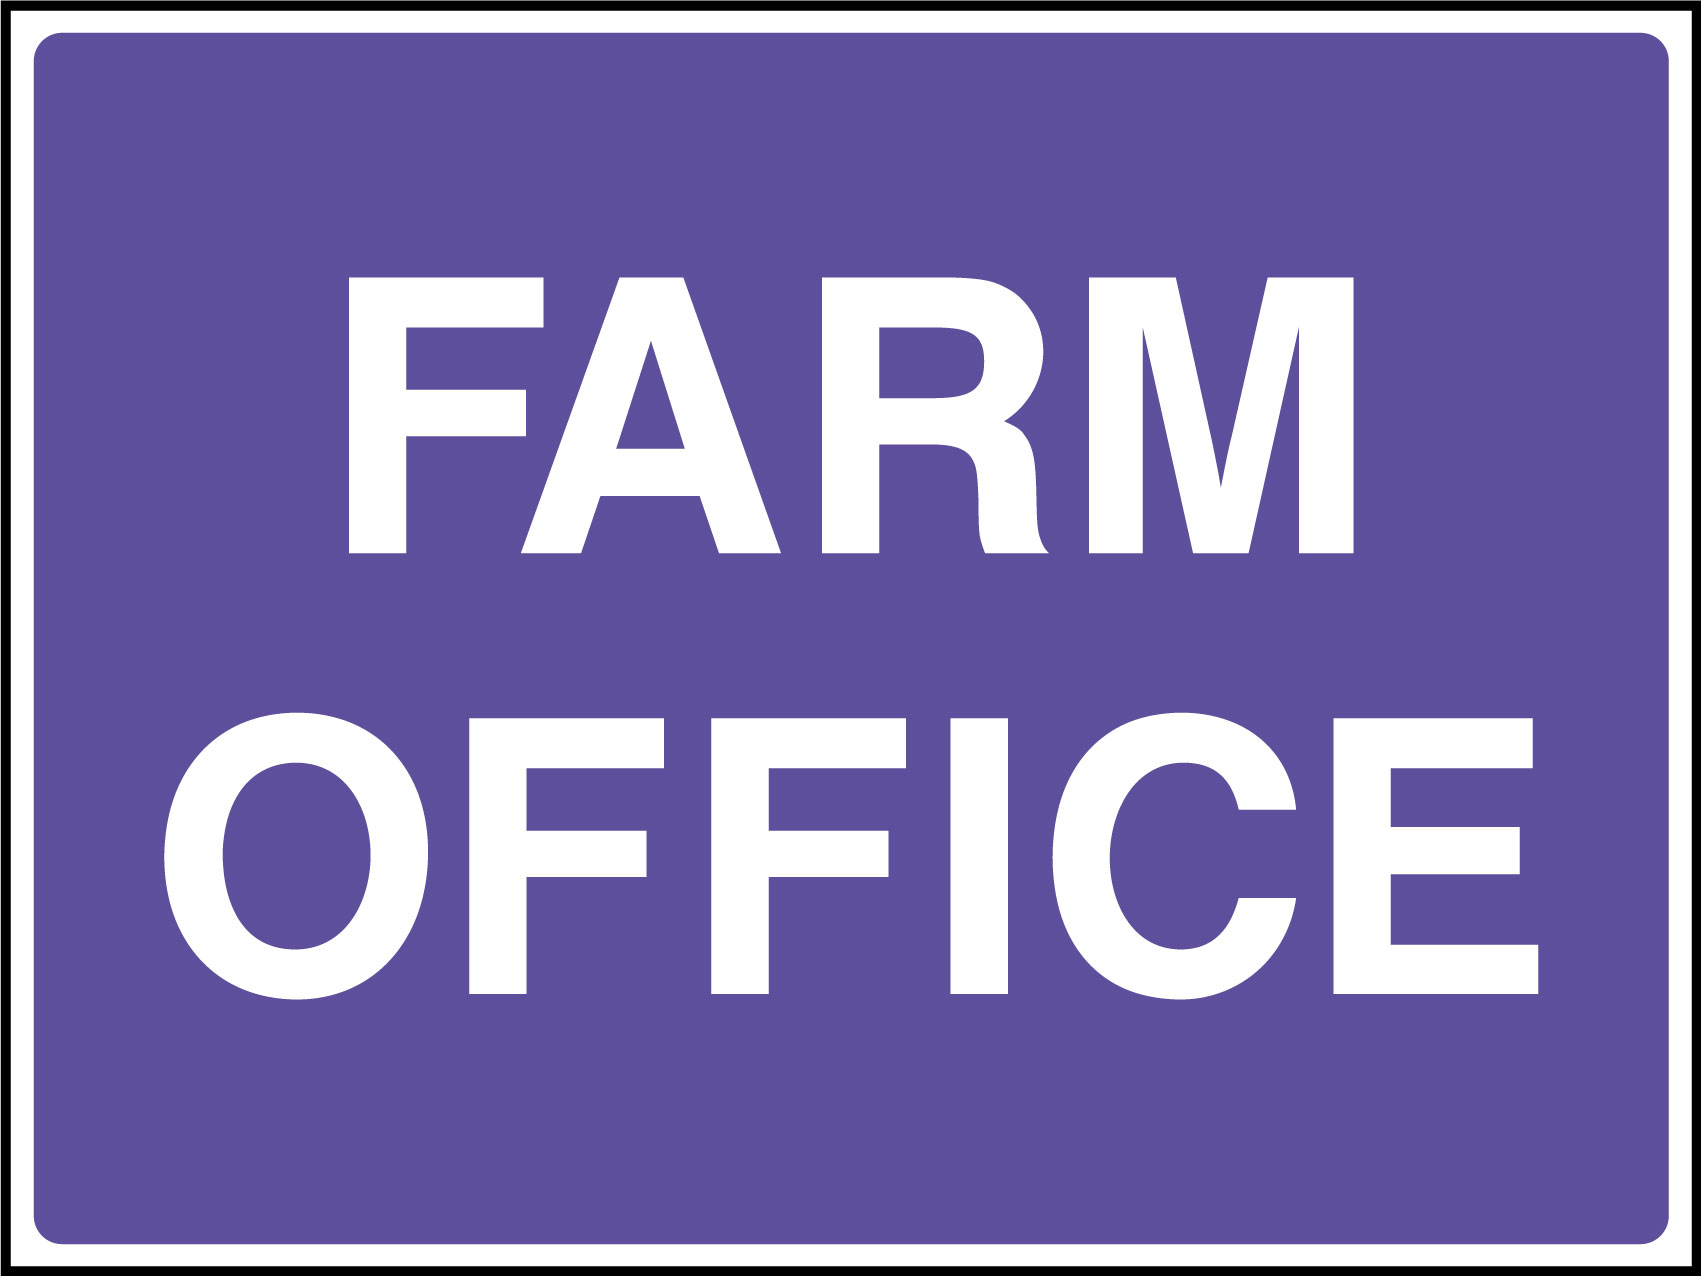 Farm office sign | Health and Safety Signs